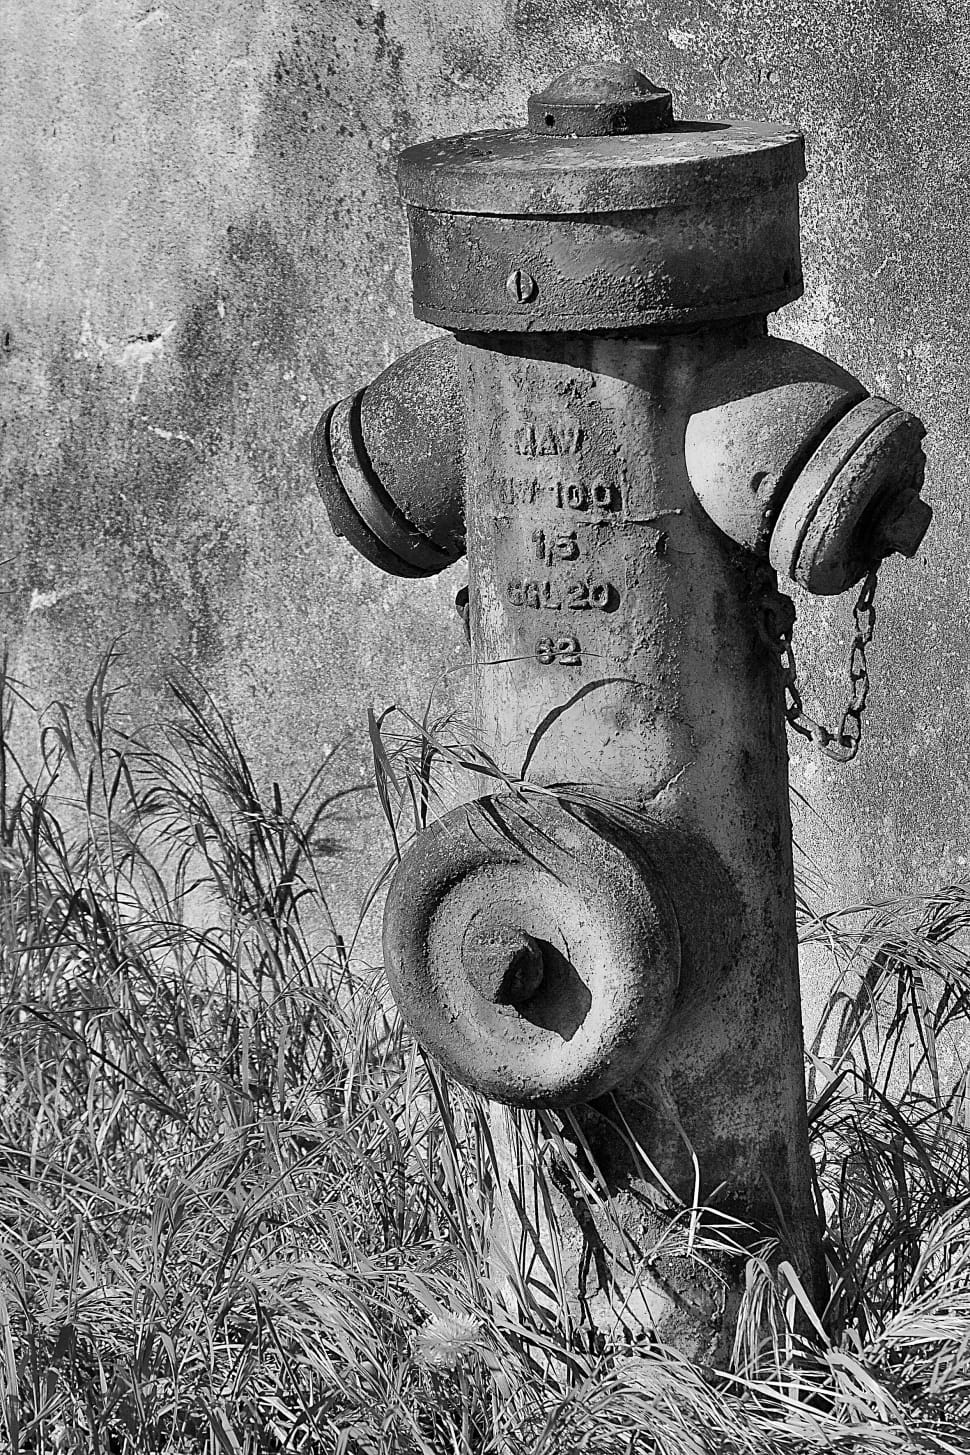 grey metal fire hydrant preview